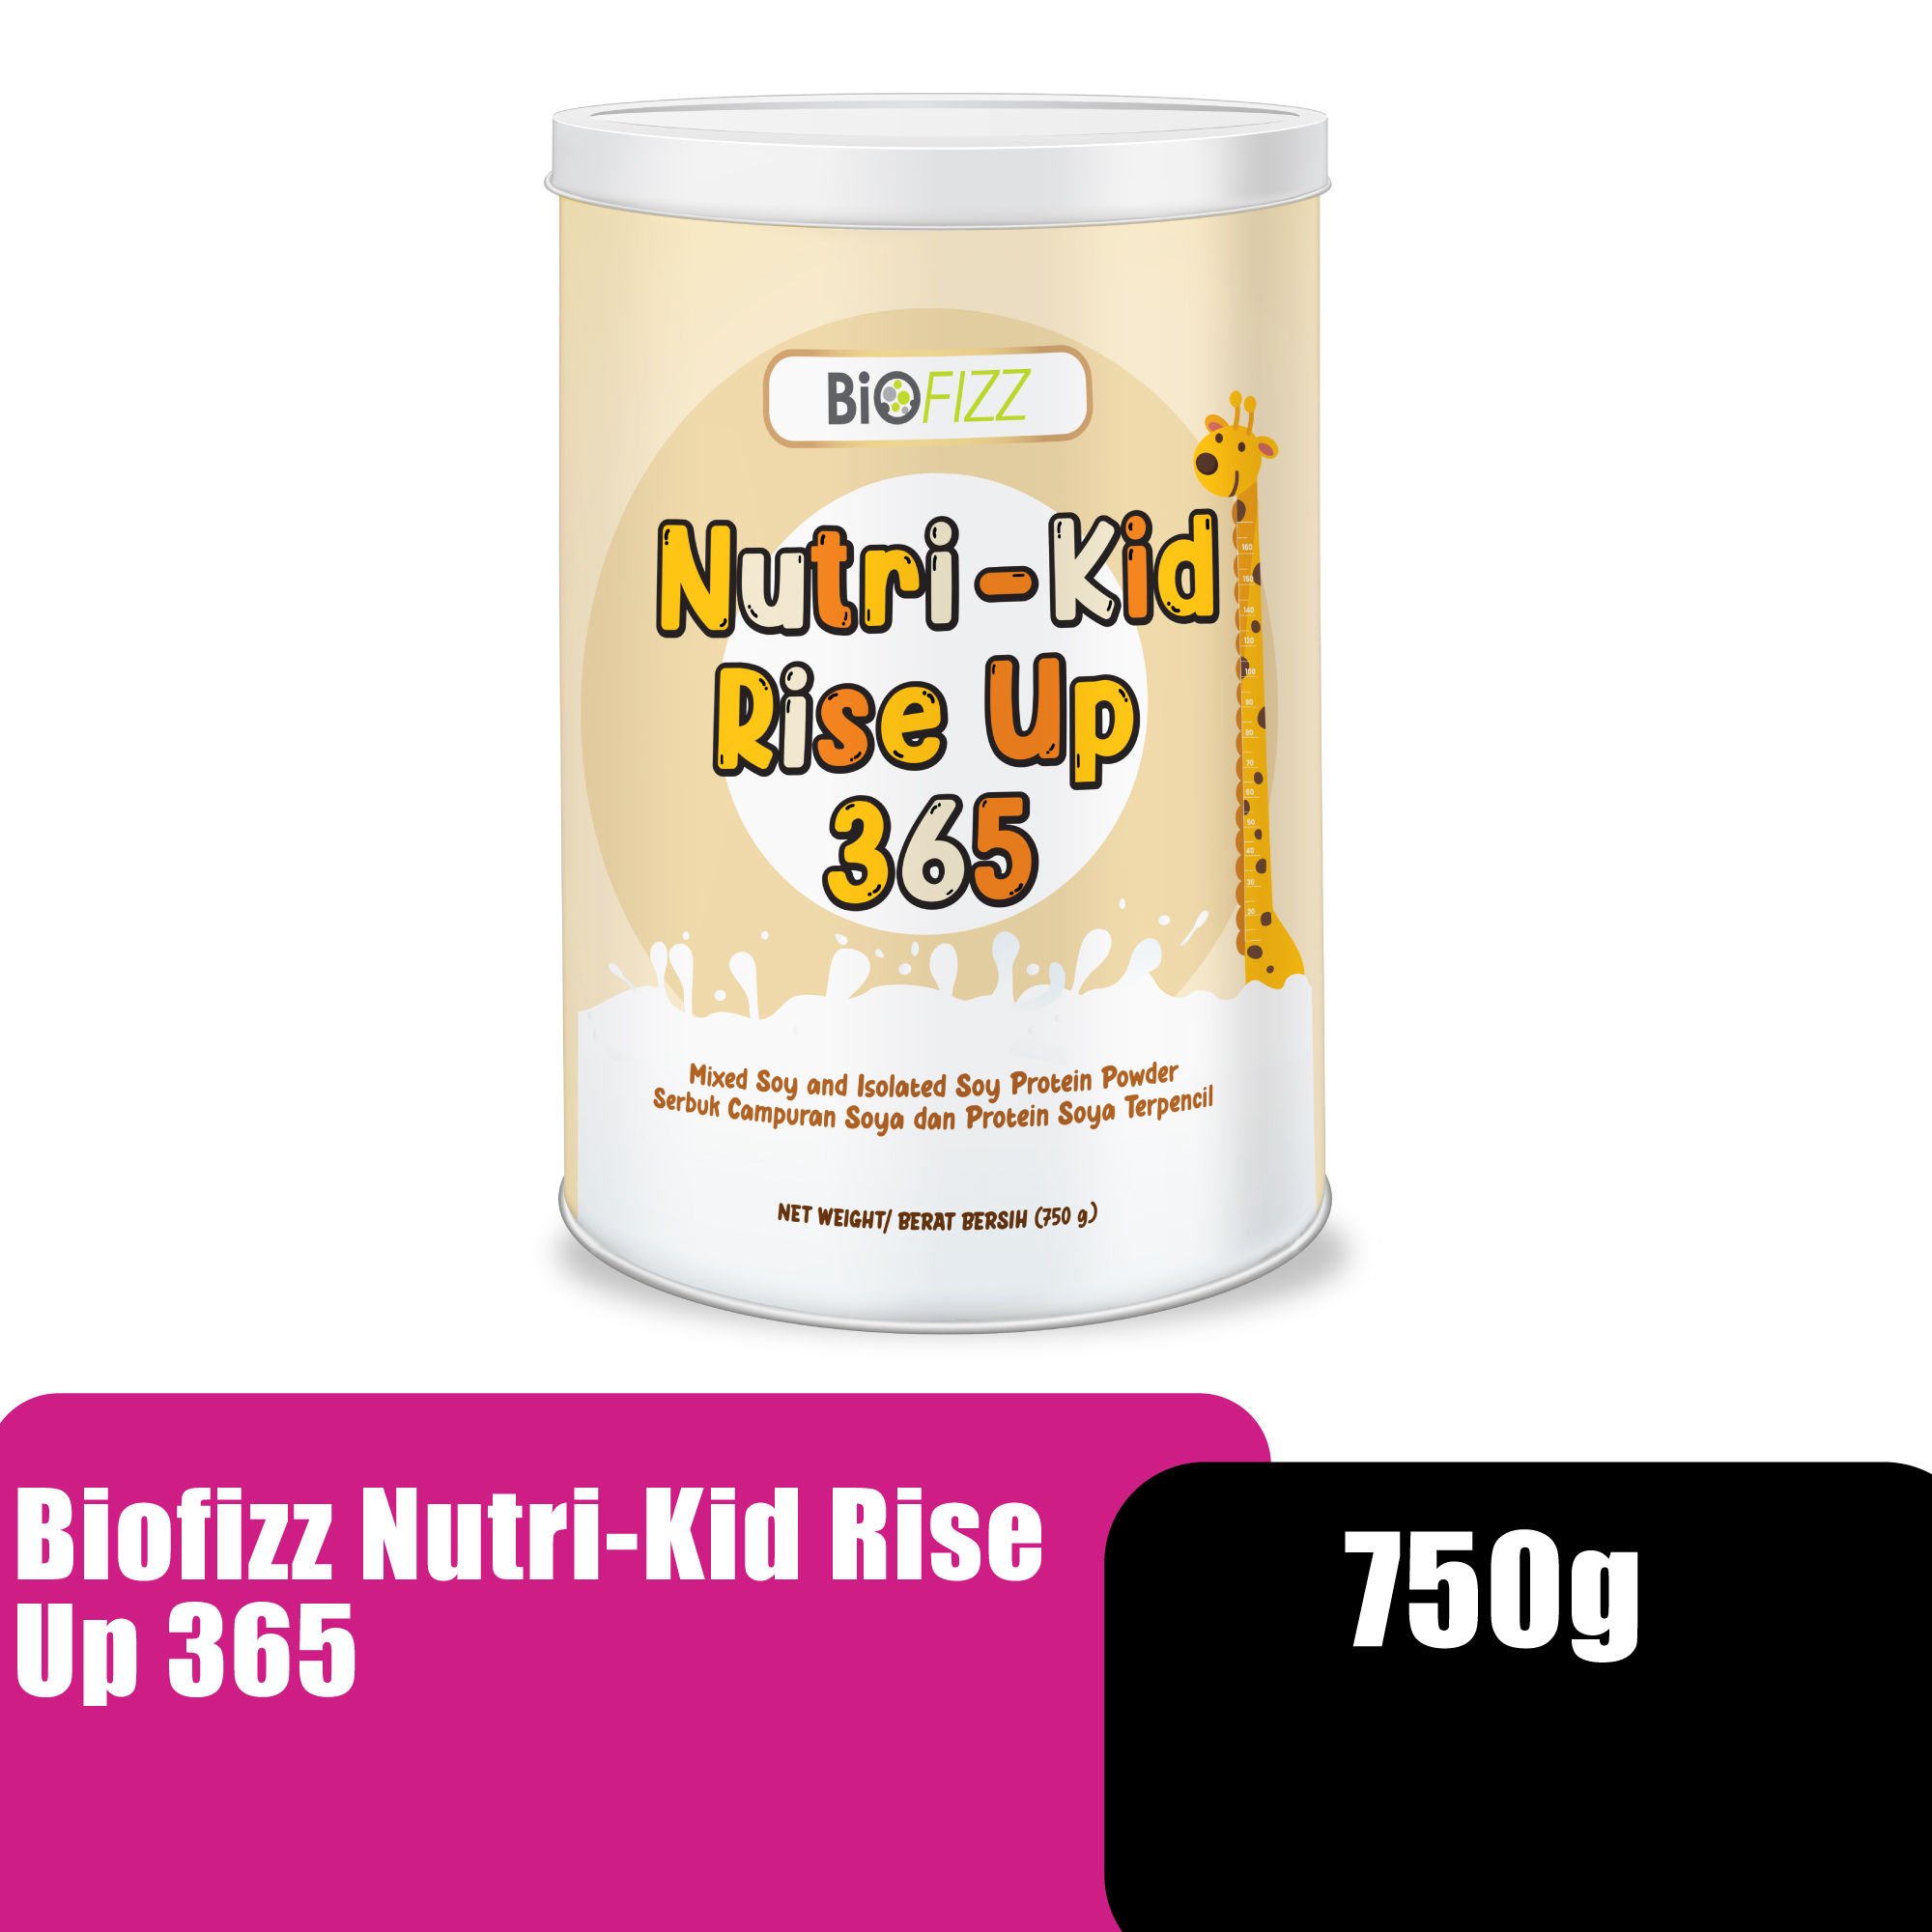 BioFizz Nutri-Kid Rise Up 365 - Lactose-Free Protein, Soy Protein Isolate, Soy Powder, Soya Bean Powder - 750g